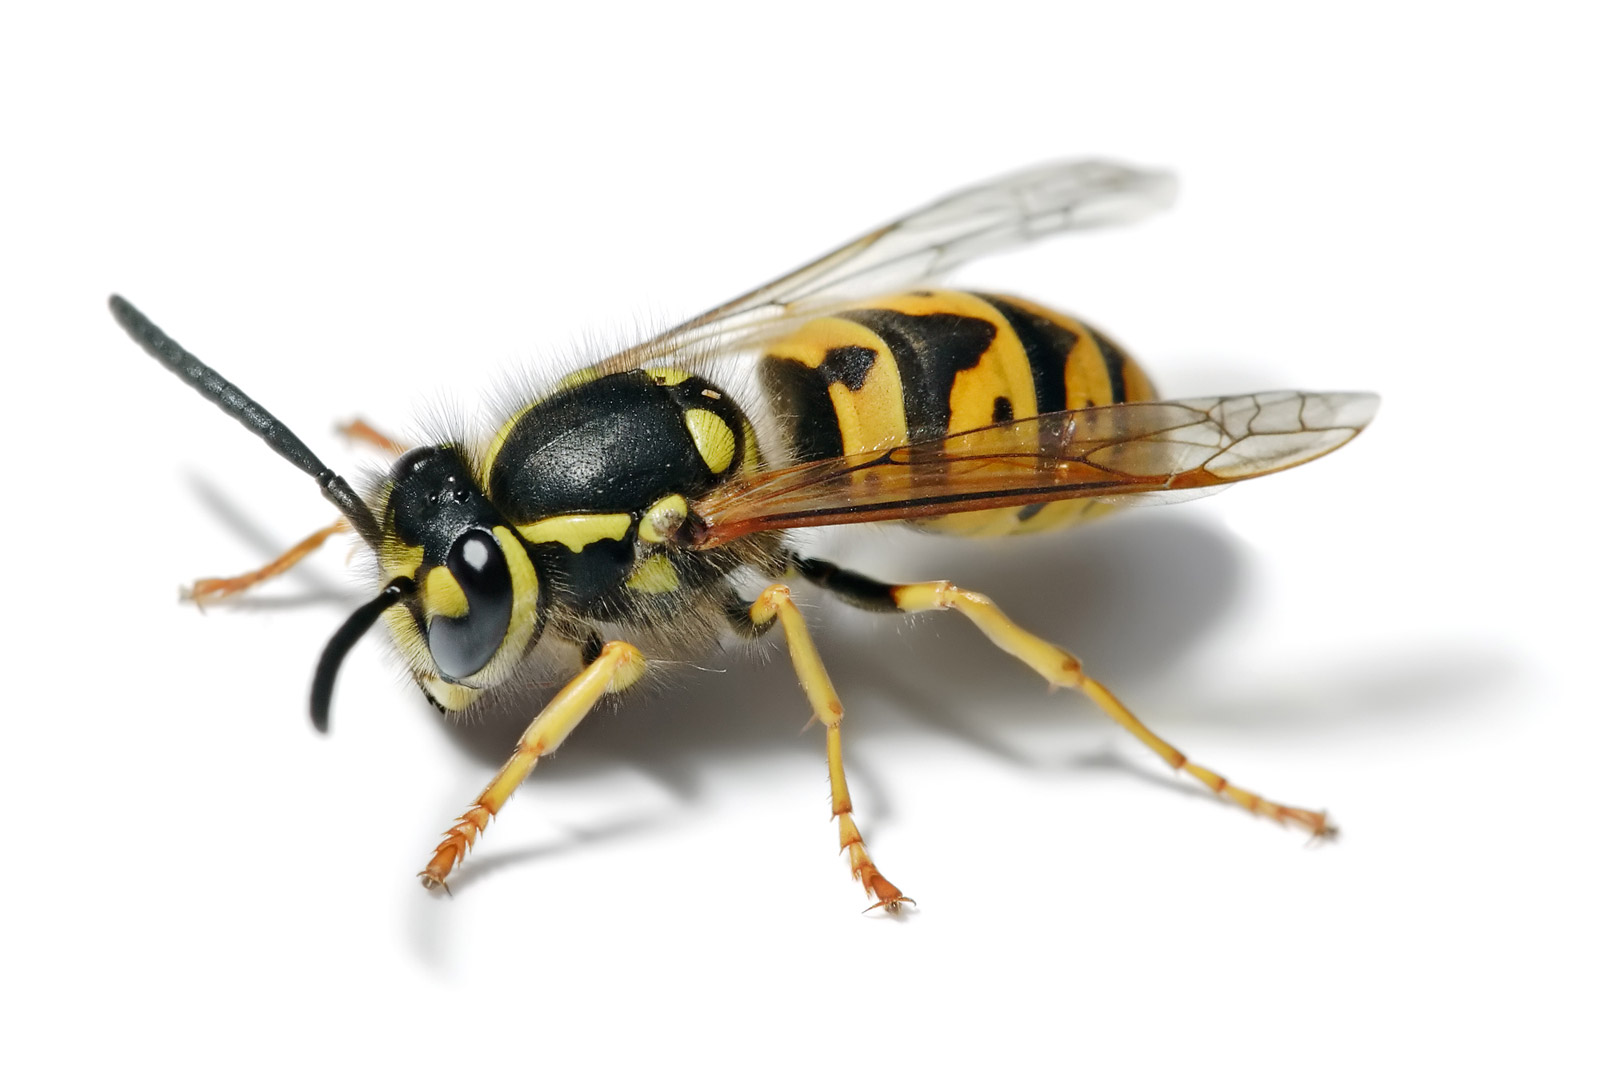 The common wasp